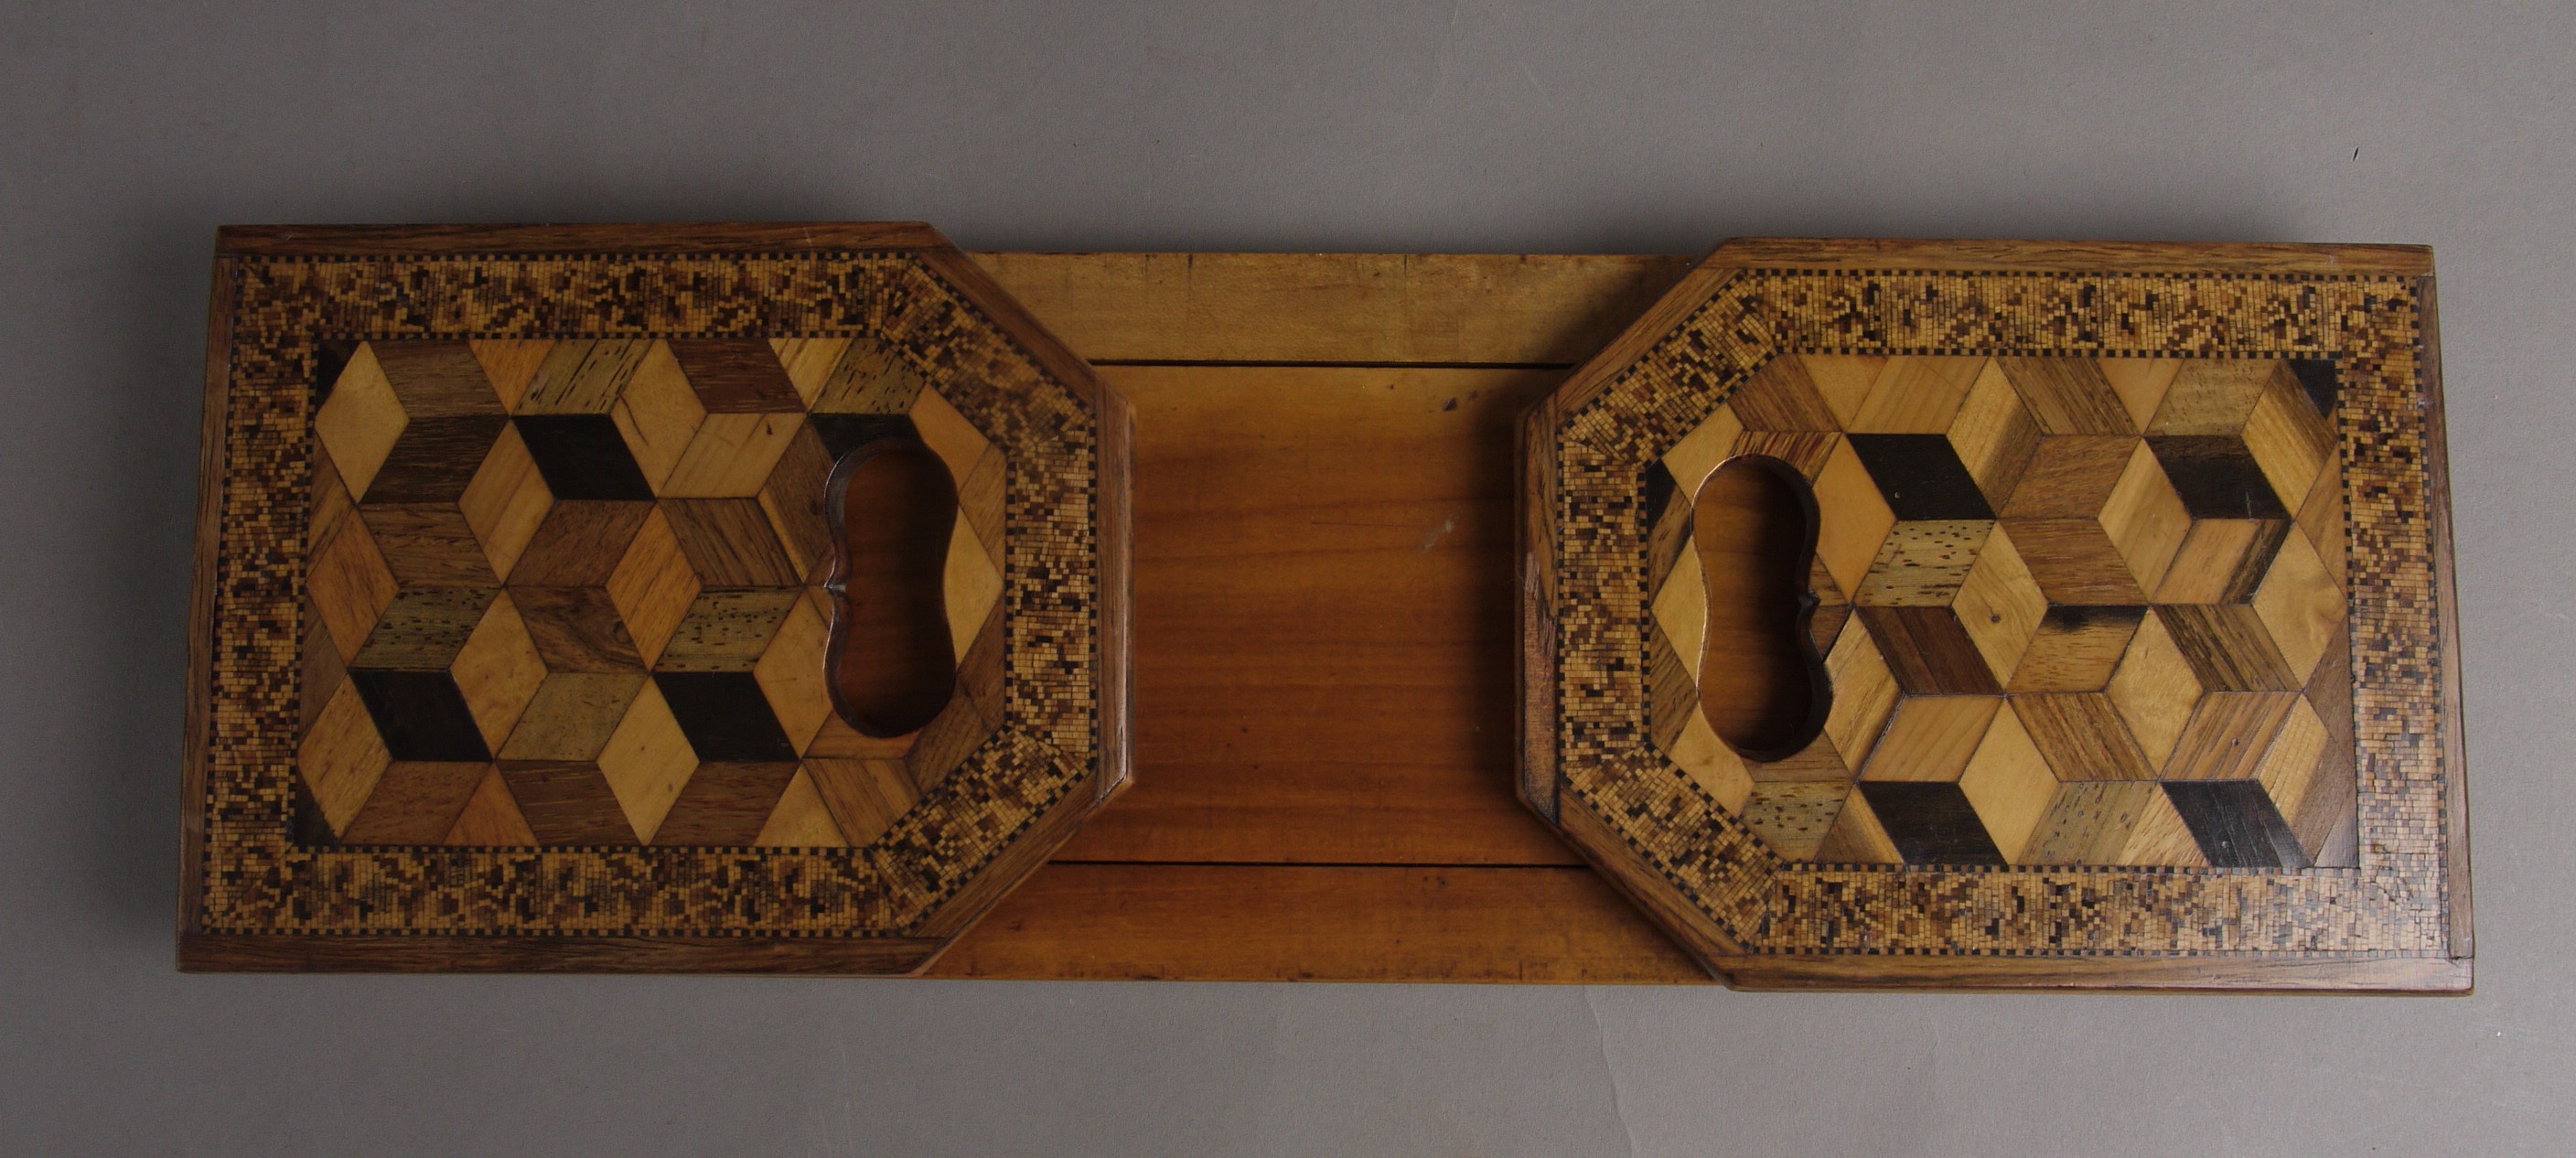 A 19TH CENTURY TUNBRIDGEWARE ADJUSTABLE BOOKSTAND, the rectangular canted end panels with finger